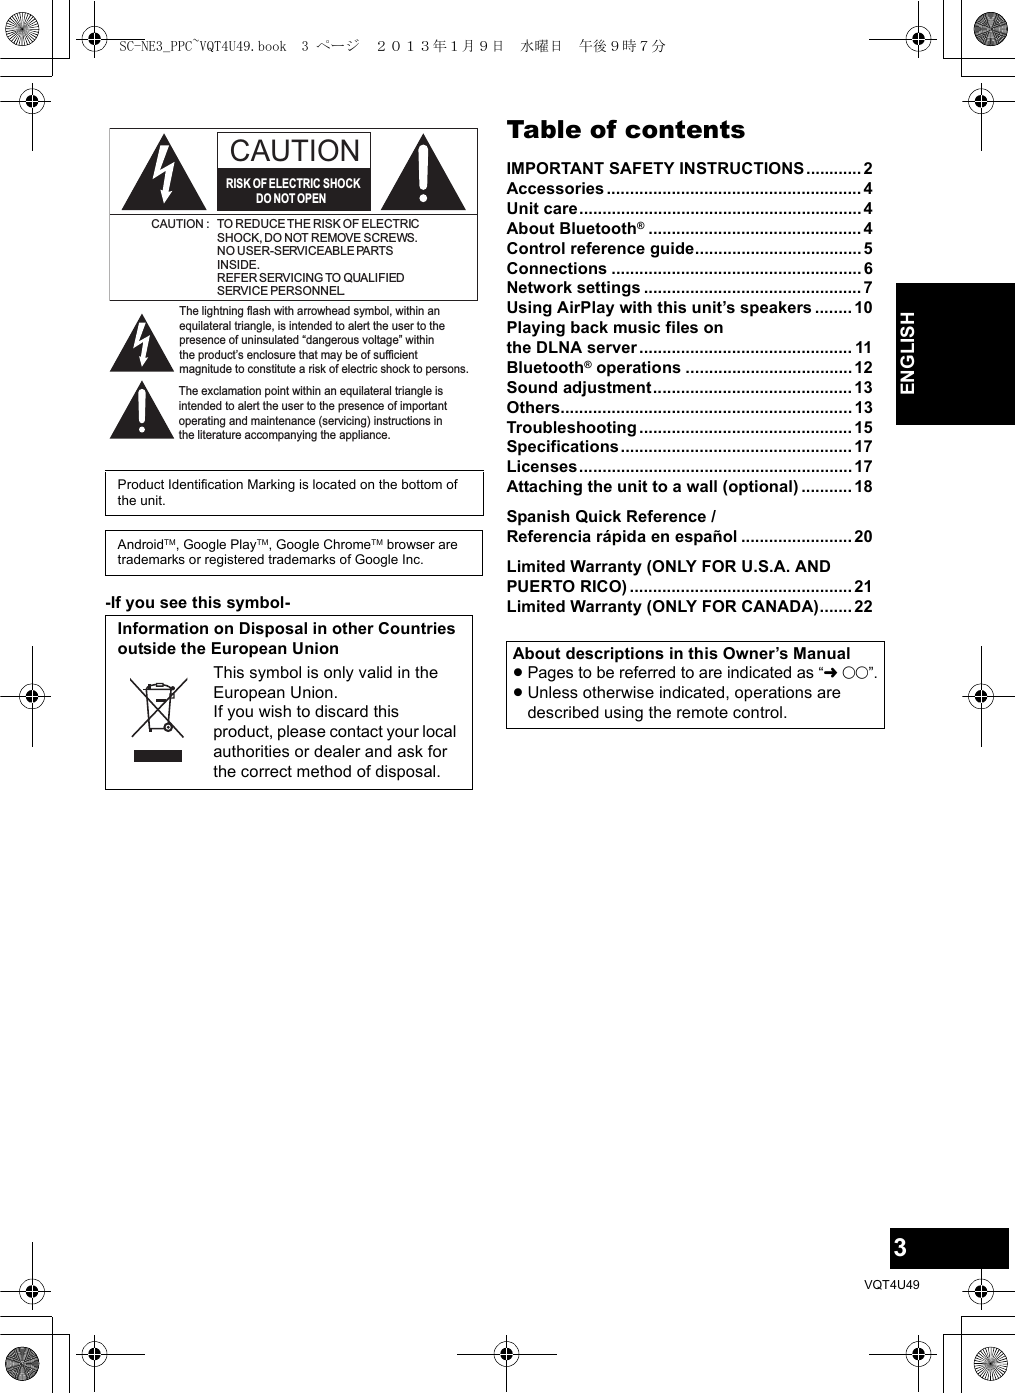 3VQT4U49ENGLISH-If you see this symbol-Table of contentsIMPORTANT SAFETY INSTRUCTIONS............2Accessories.......................................................4Unit care.............................................................4About Bluetooth®..............................................4Control reference guide....................................5Connections ......................................................6Network settings ...............................................7Using AirPlay with this unit’s speakers ........10Playing back music files on the DLNA server.............................................. 11Bluetooth® operations ....................................12Sound adjustment...........................................13Others...............................................................13Troubleshooting .............................................. 15Specifications..................................................17Licenses...........................................................17Attaching the unit to a wall (optional) ........... 18Spanish Quick Reference / Referencia rápida en español ........................ 20Limited Warranty (ONLY FOR U.S.A. AND PUERTO RICO) ................................................ 21Limited Warranty (ONLY FOR CANADA)....... 22Product Identification Marking is located on the bottom of the unit.AndroidTM, Google PlayTM, Google ChromeTM browser are trademarks or registered trademarks of Google Inc.Information on Disposal in other Countries outside the European UnionThis symbol is only valid in the European Union.If you wish to discard this product, please contact your local authorities or dealer and ask for the correct method of disposal.The lightning flash with arrowhead symbol, within an equilateral triangle, is intended to alert the user to the presence of uninsulated “dangerous voltage” within the product’s enclosure that may be of sufficient magnitude to constitute a risk of electric shock to persons.CAUTIONCAUTION : TO REDUCE THE RISK OF ELECTRICSHOCK, DO NOT REMOVE SCREWS.NO USER-SERVICEABLE PARTSINSIDE.REFER SERVICING TO QUALIFIEDSERVICE PERSONNEL.The exclamation point within an equilateral triangle is intended to alert the user to the presence of important operating and maintenance (servicing) instructions in the literature accompanying the appliance.RISK OF ELECTRIC SHOCKDO NOT OPENAbout descriptions in this Owner’s Manual≥Pages to be referred to are indicated as “l±±”.≥Unless otherwise indicated, operations are described using the remote control.SC-NE3_PPC~VQT4U49.book  3 ページ  ２０１３年１月９日　水曜日　午後９時７分